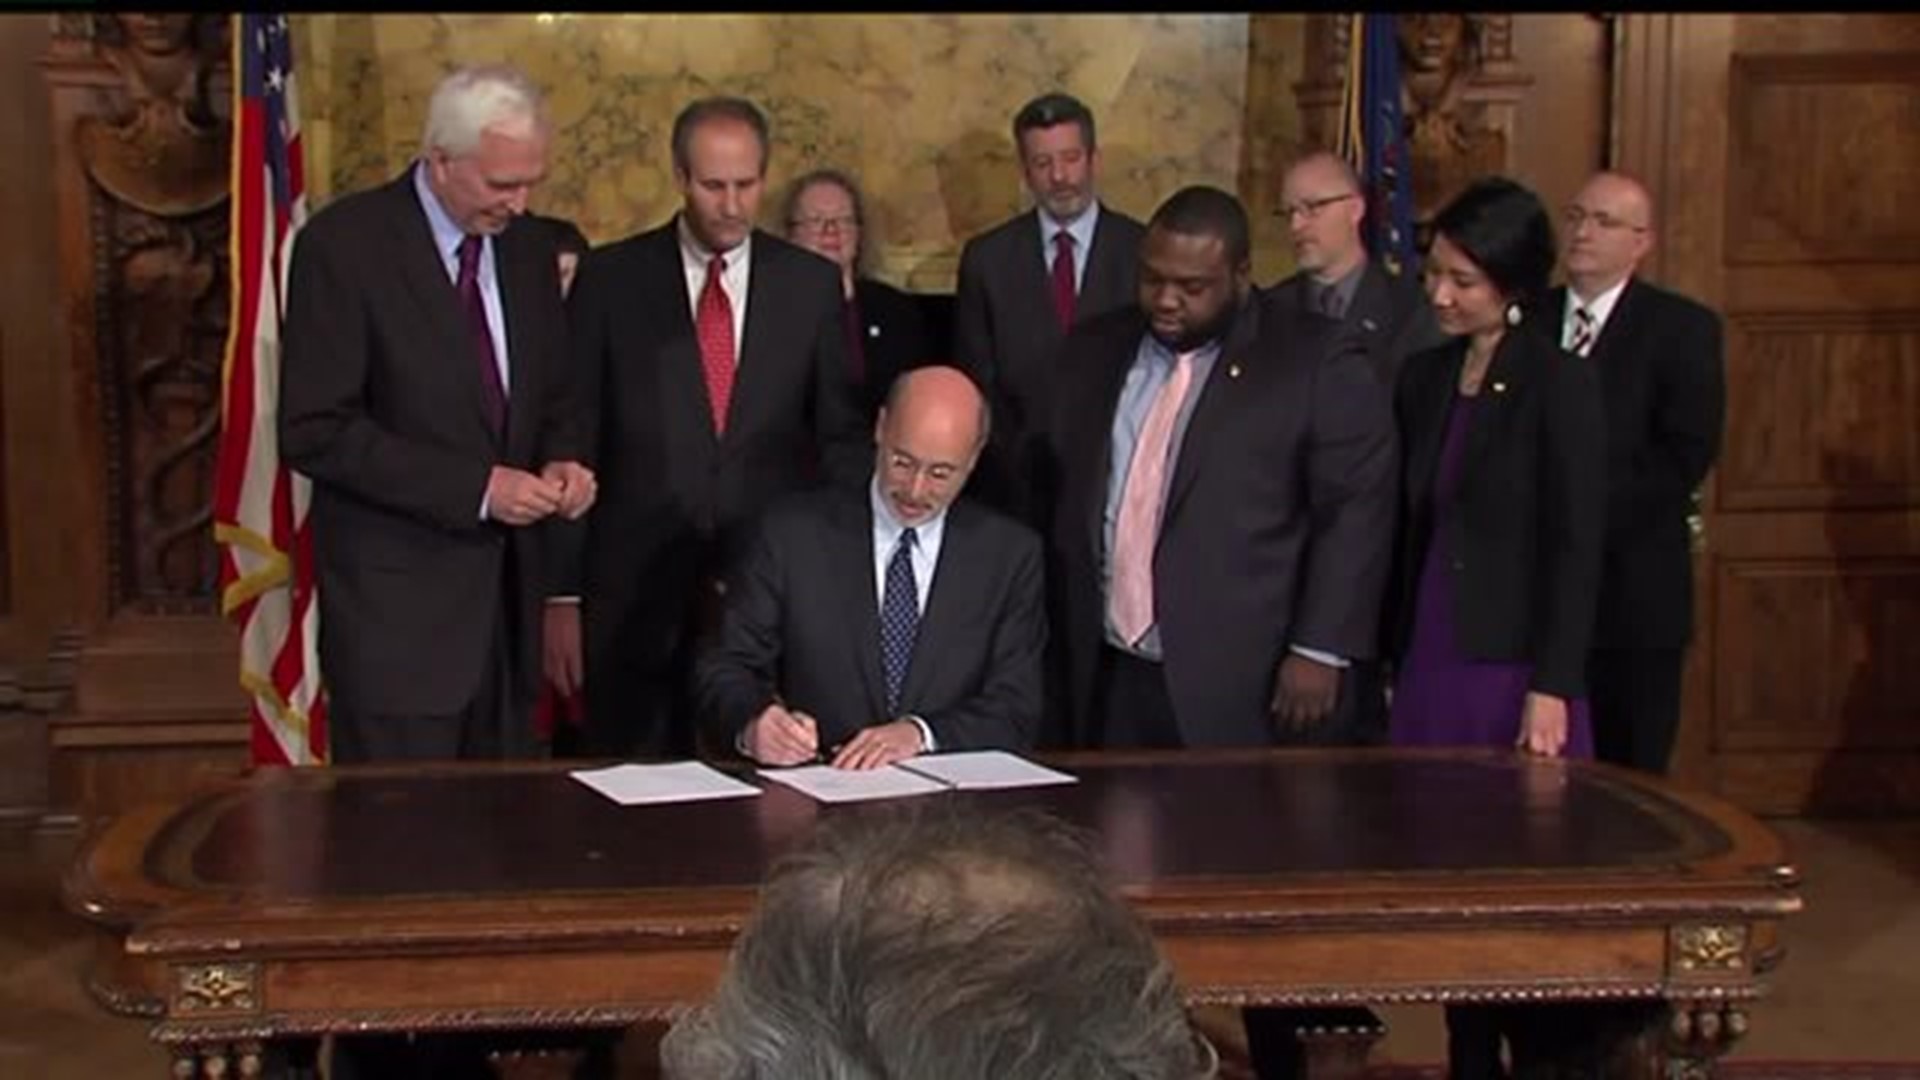 Governor Wolf Signs 2nd Chance Bill into Law